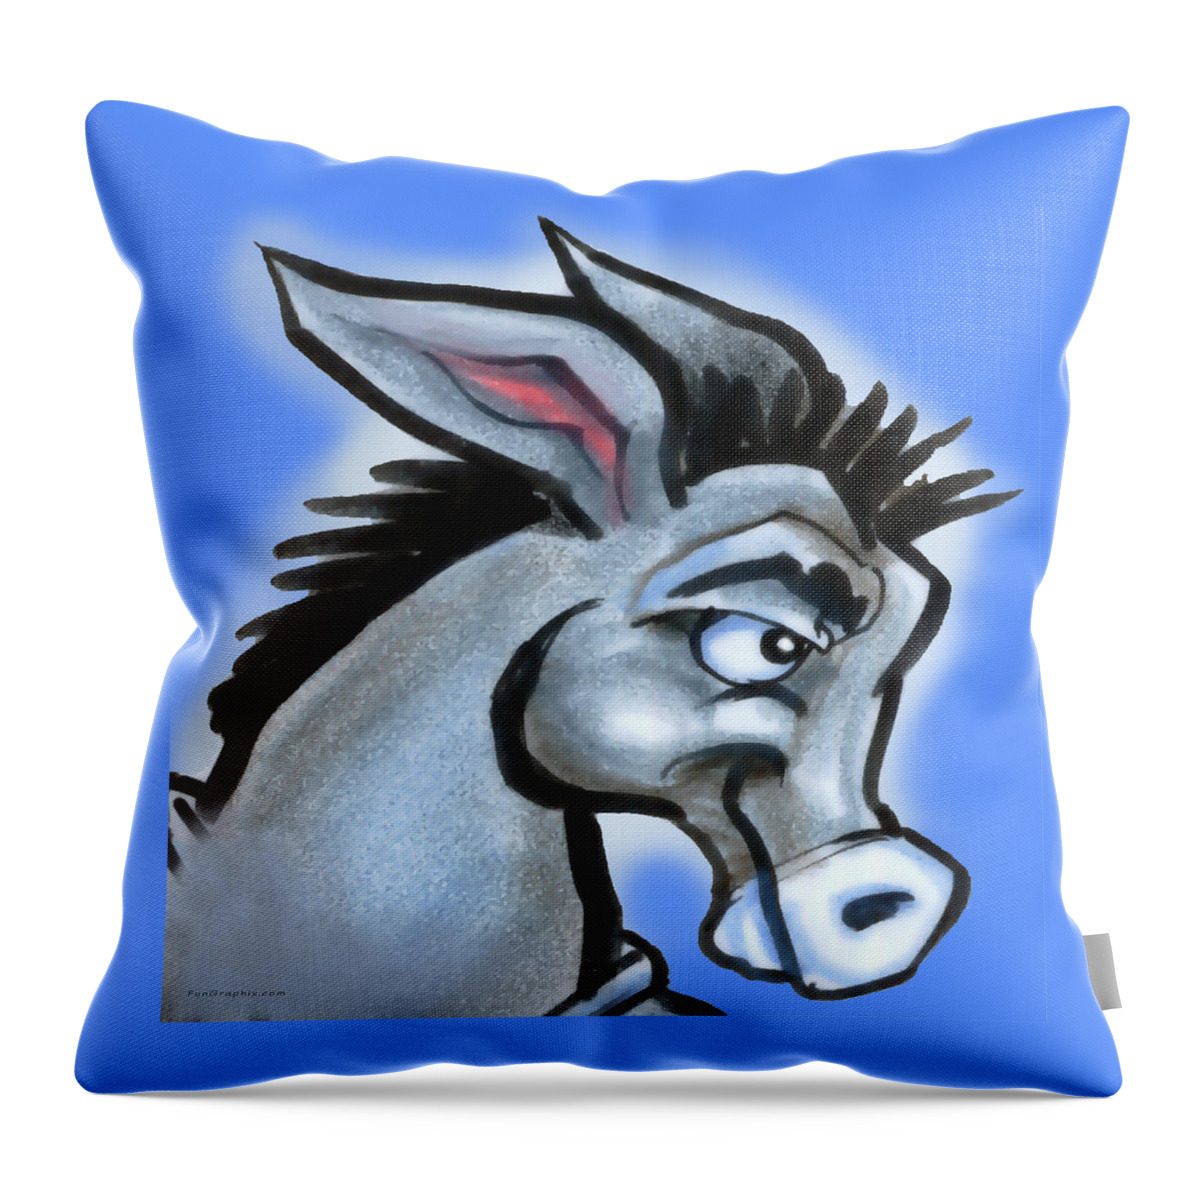 Donkey Throw Pillow featuring the digital art Donkey by Kevin Middleton